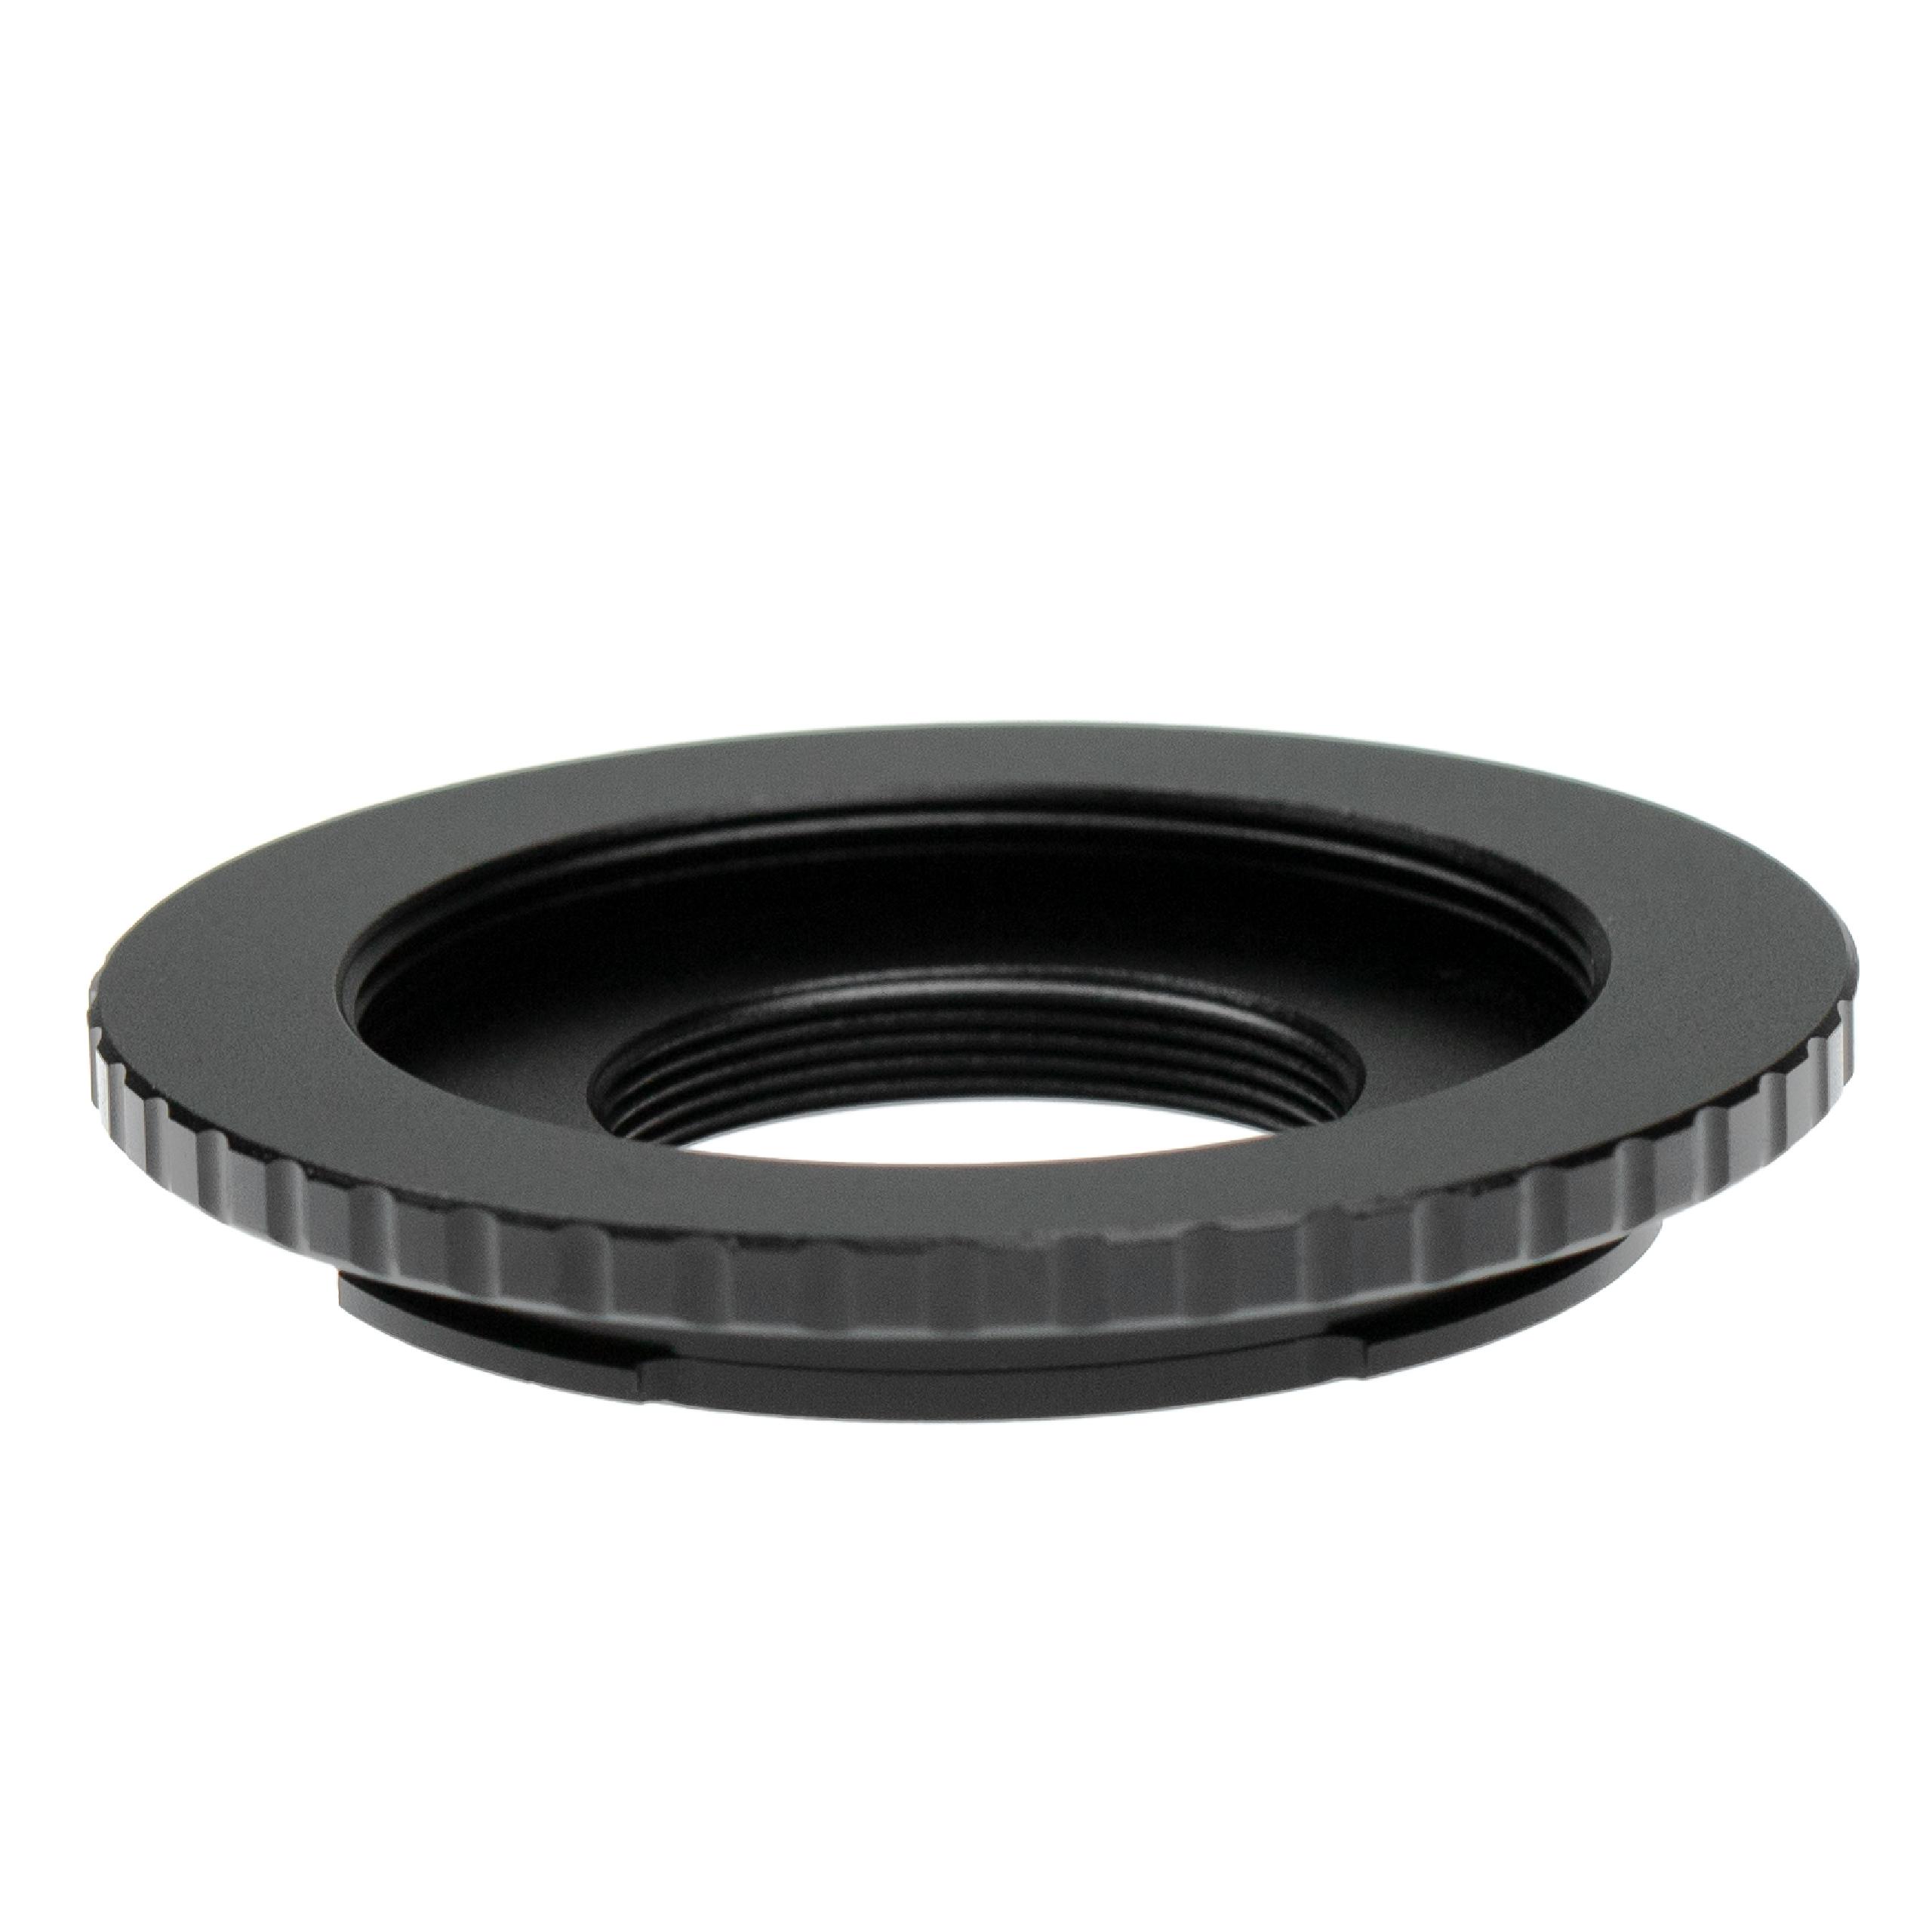 vhbw Adapter Ring for Lenses with M42 Thread Camera, Lens